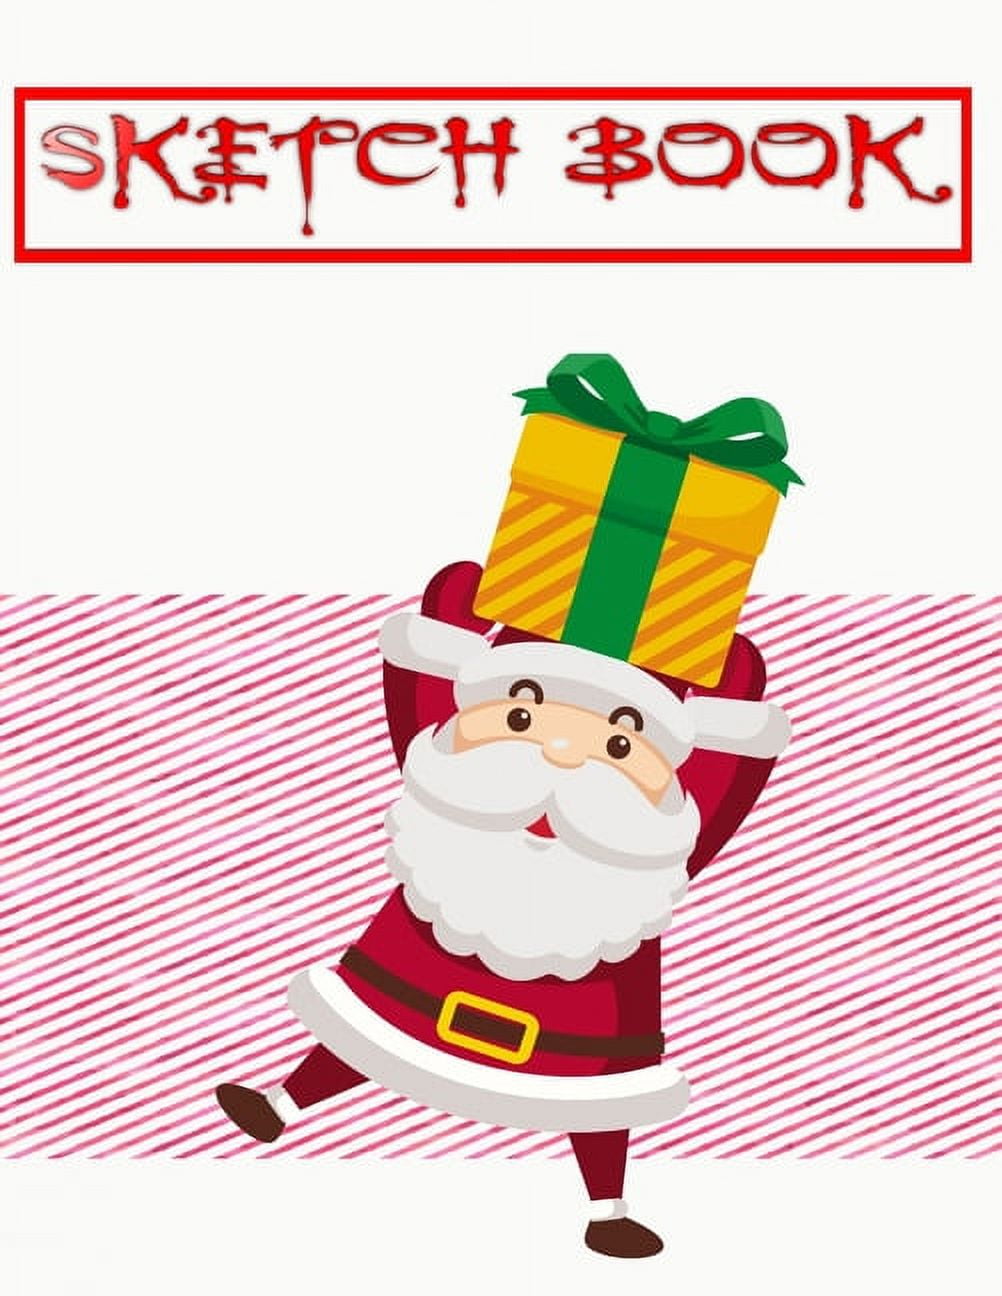 Sketchbook For Markers Christmas Gift Bags: Sketch Book Scratch Magic Notes  For Kids Arts And Crafts - Coloring - Santa # Personalized Size 8.5 X 11  Large 110 Page Large Prints Best Gifts. (Paperback) 